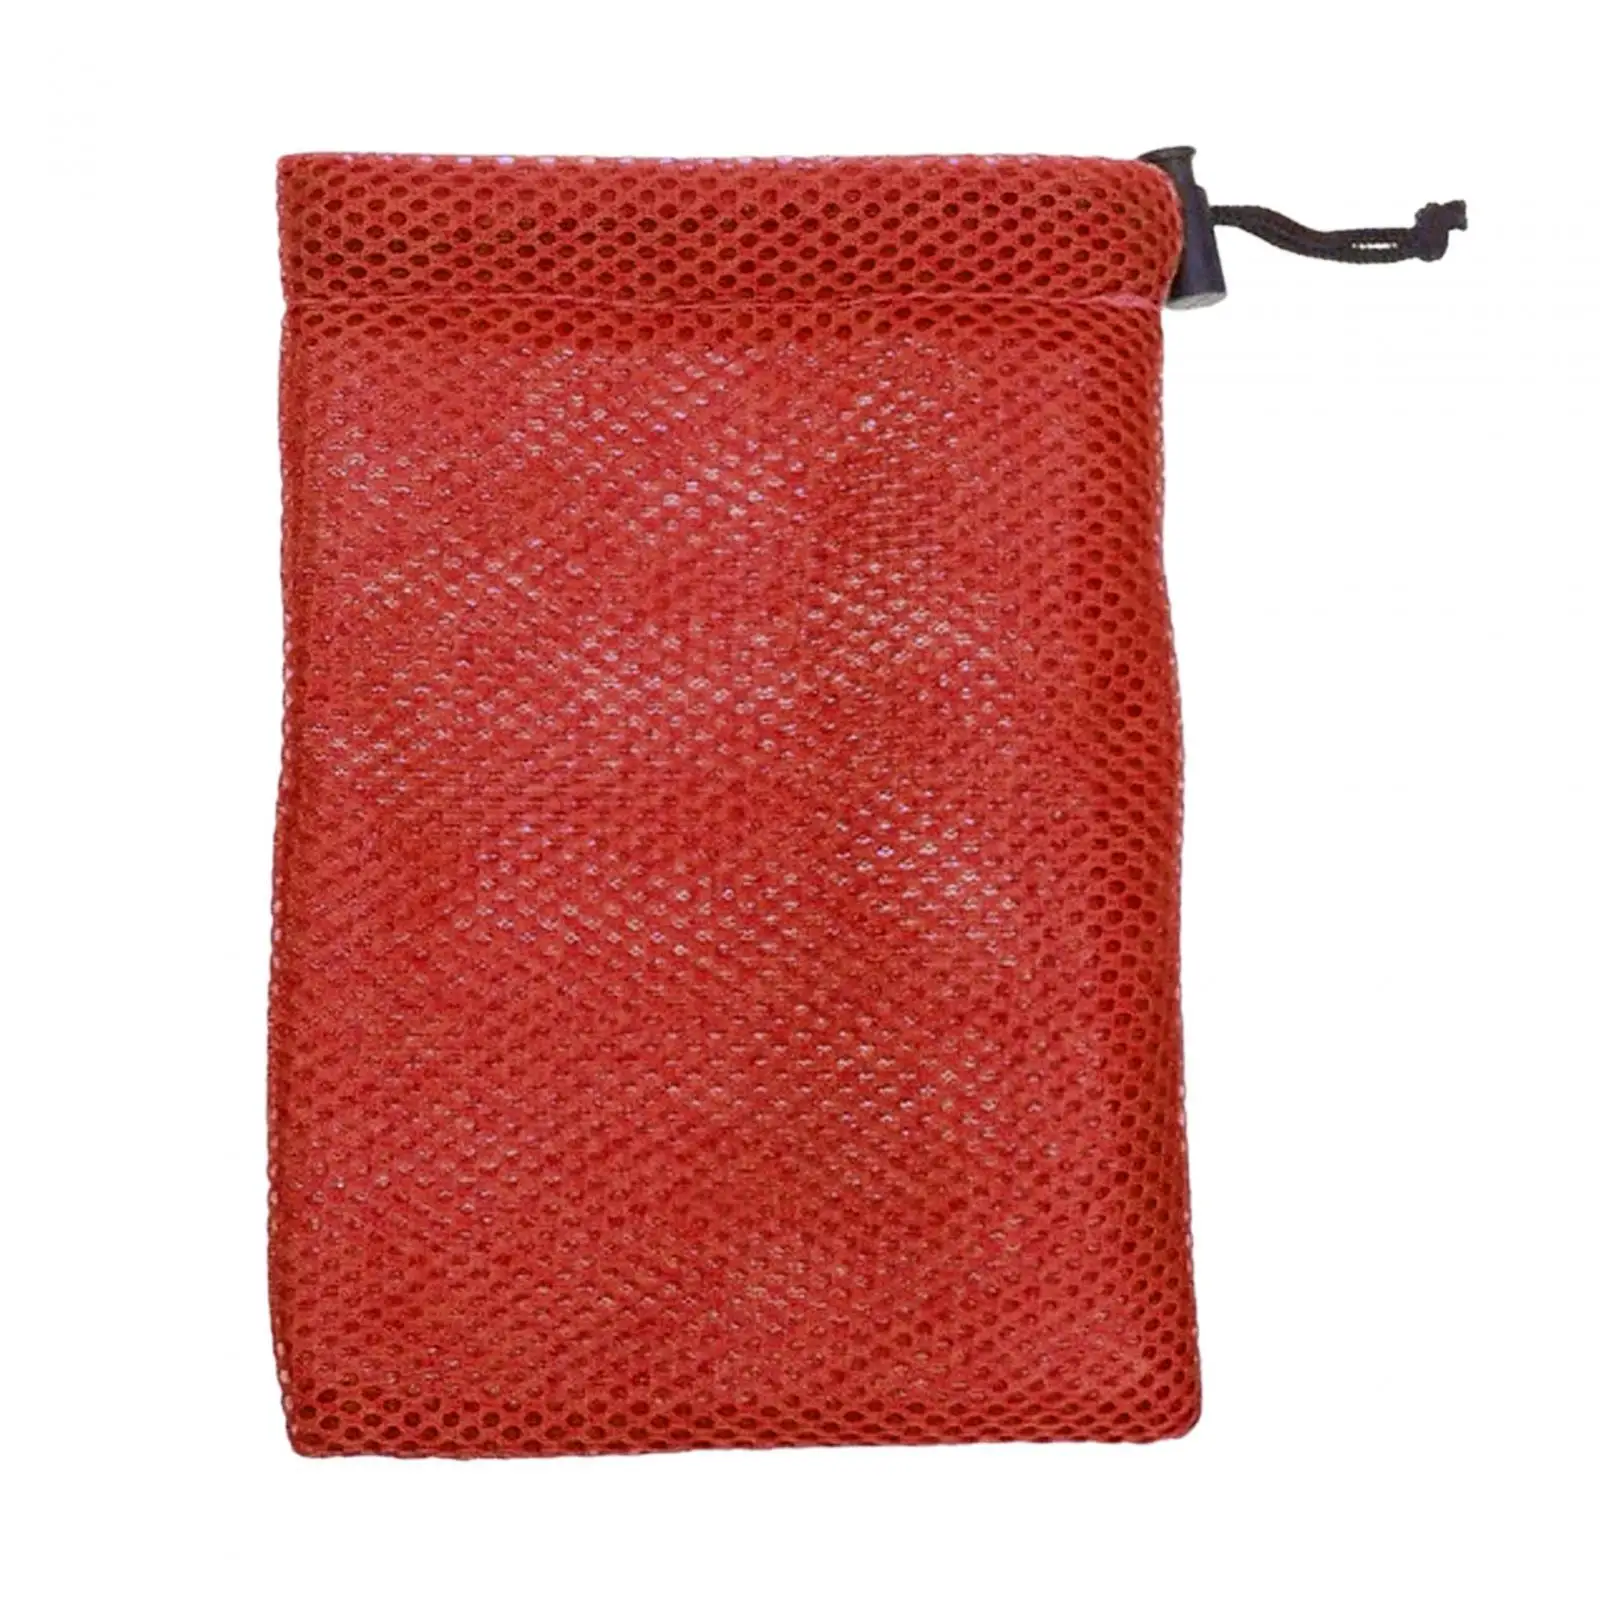 Small Mesh Drawstring Bag Stuff Sack with Cord Lock Closure Mesh Bag Storage Pouch for Collecting Toys Cosmetics Tennis Balls